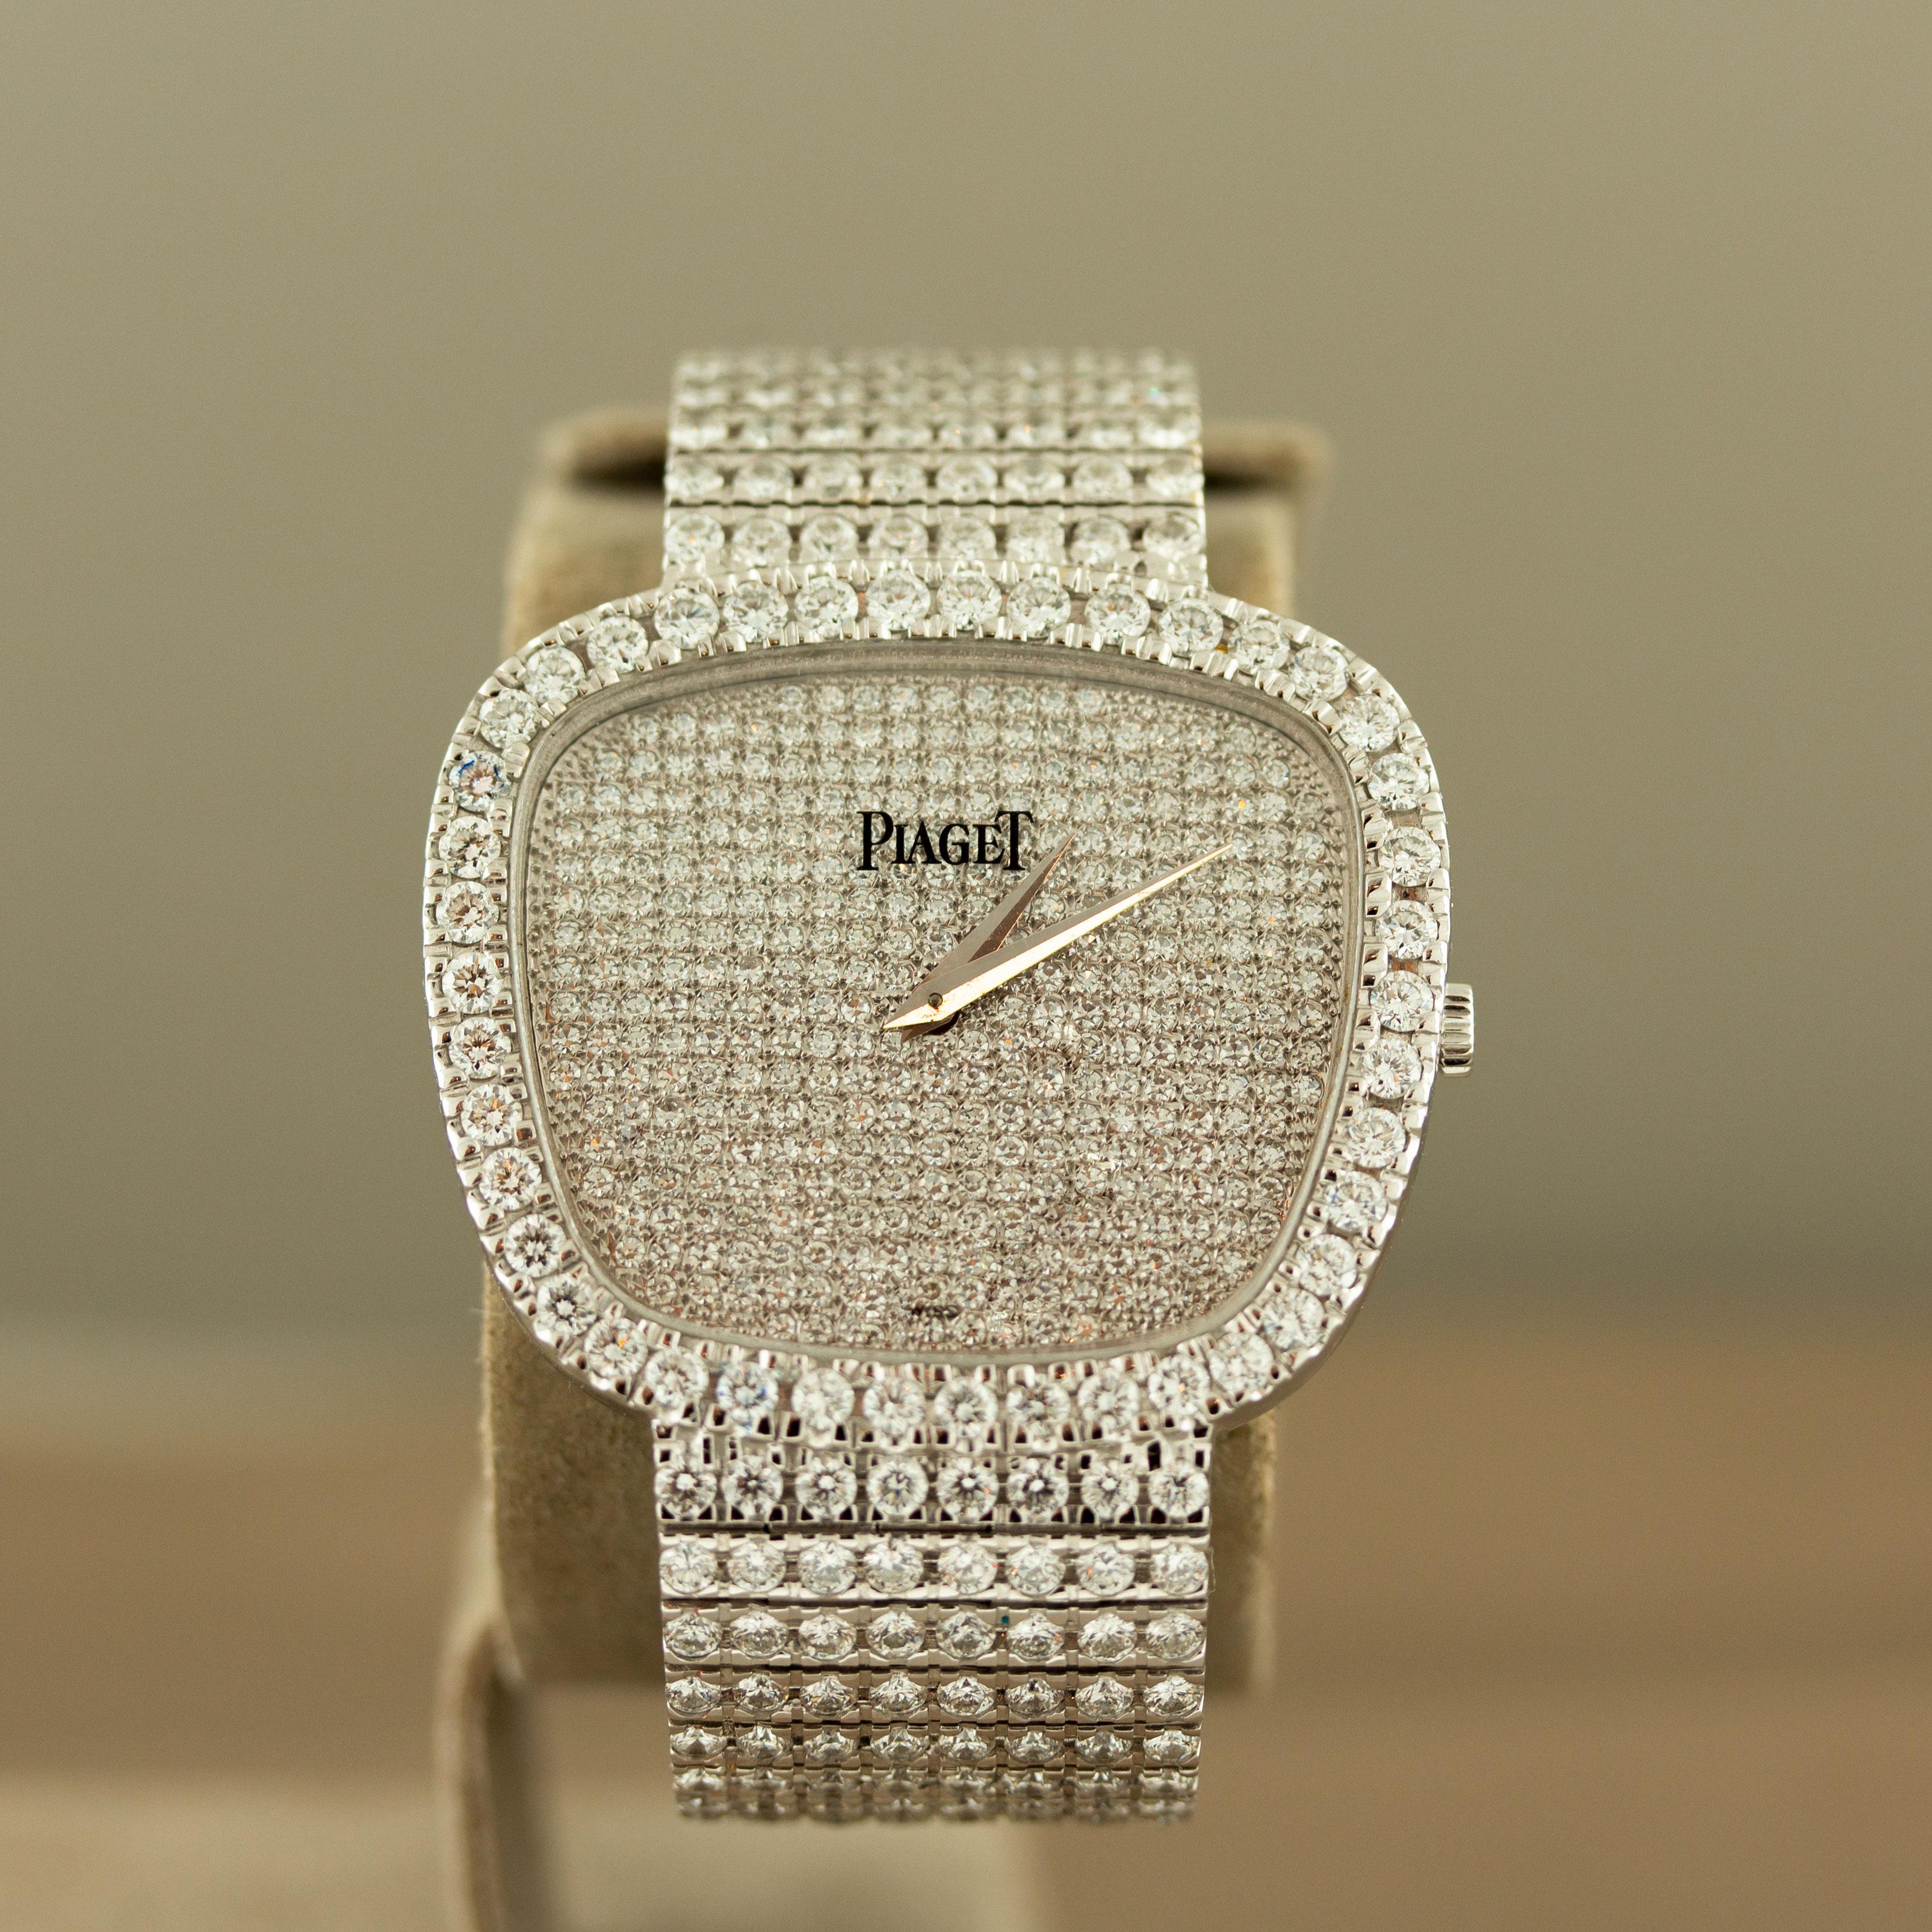 containing 564 full cut diamonds [G/VS] weighing 13.05 carats total, and 344 pave set single cut diamonds [G/VS] weighing 1.72 carats total; the cushion shape minimalist dial signed ‘Piaget’ at 12:00 

Total diamond weight: 14.77 carats 

7 3/8